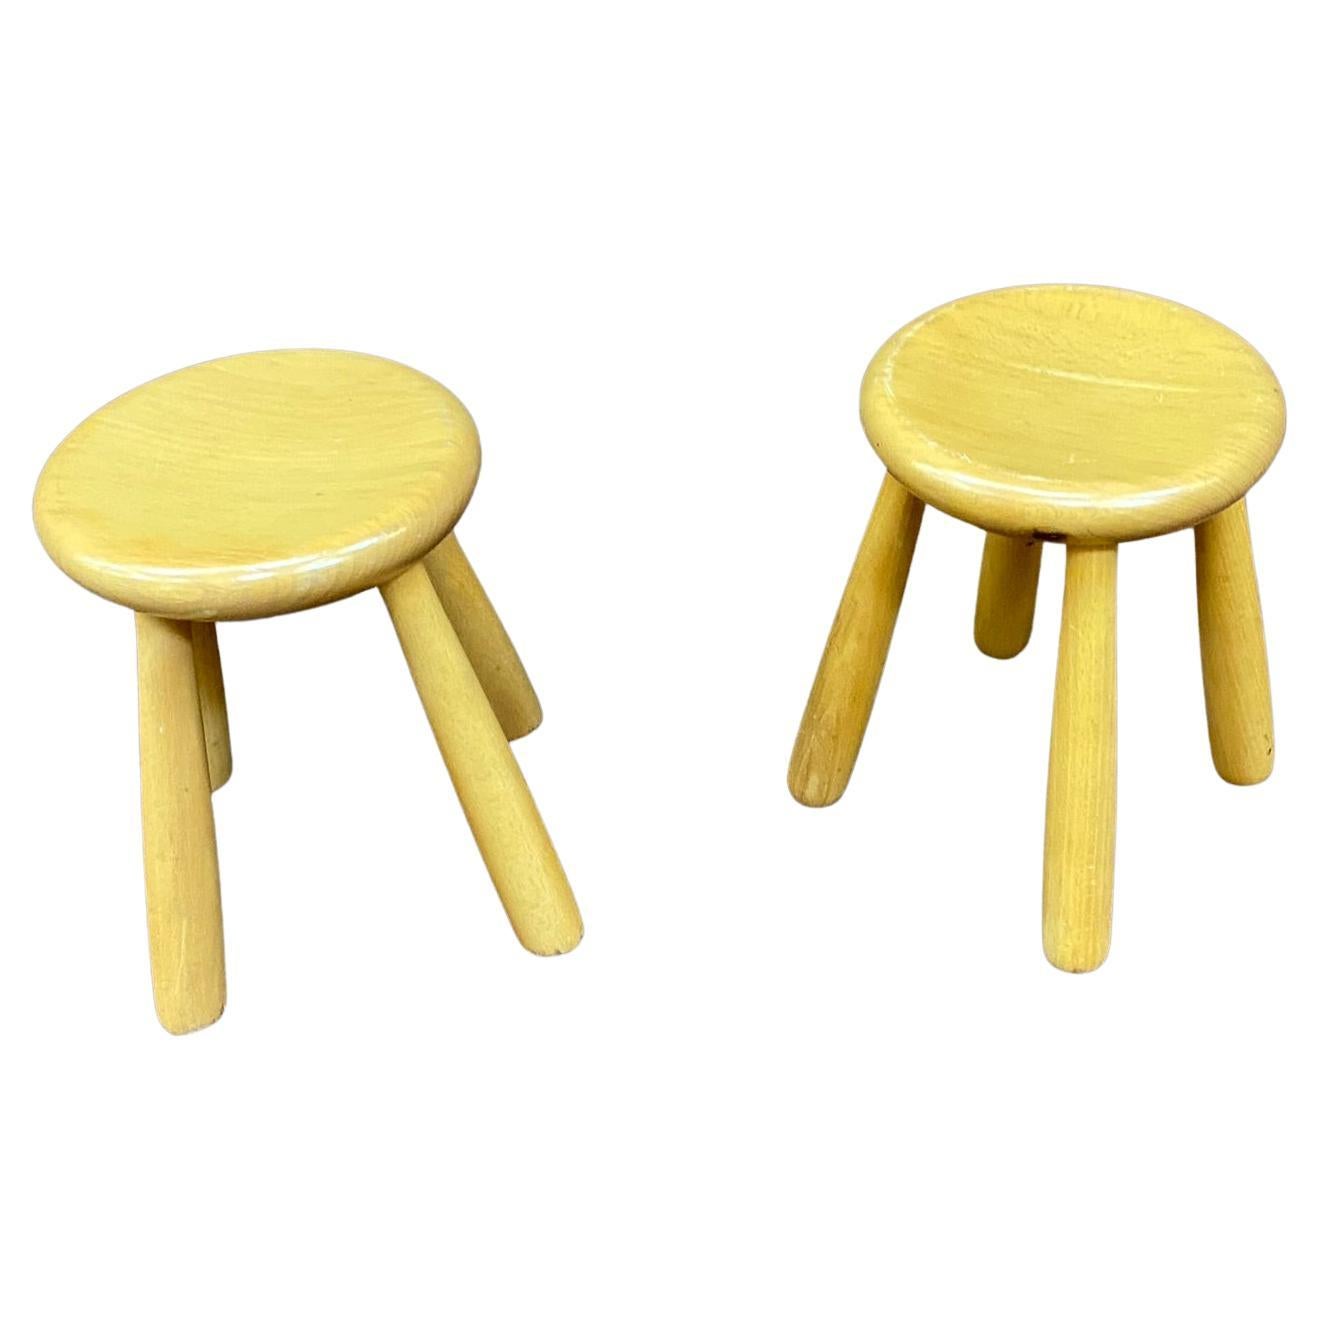 Pair of Small Stools, circa 1970 For Sale